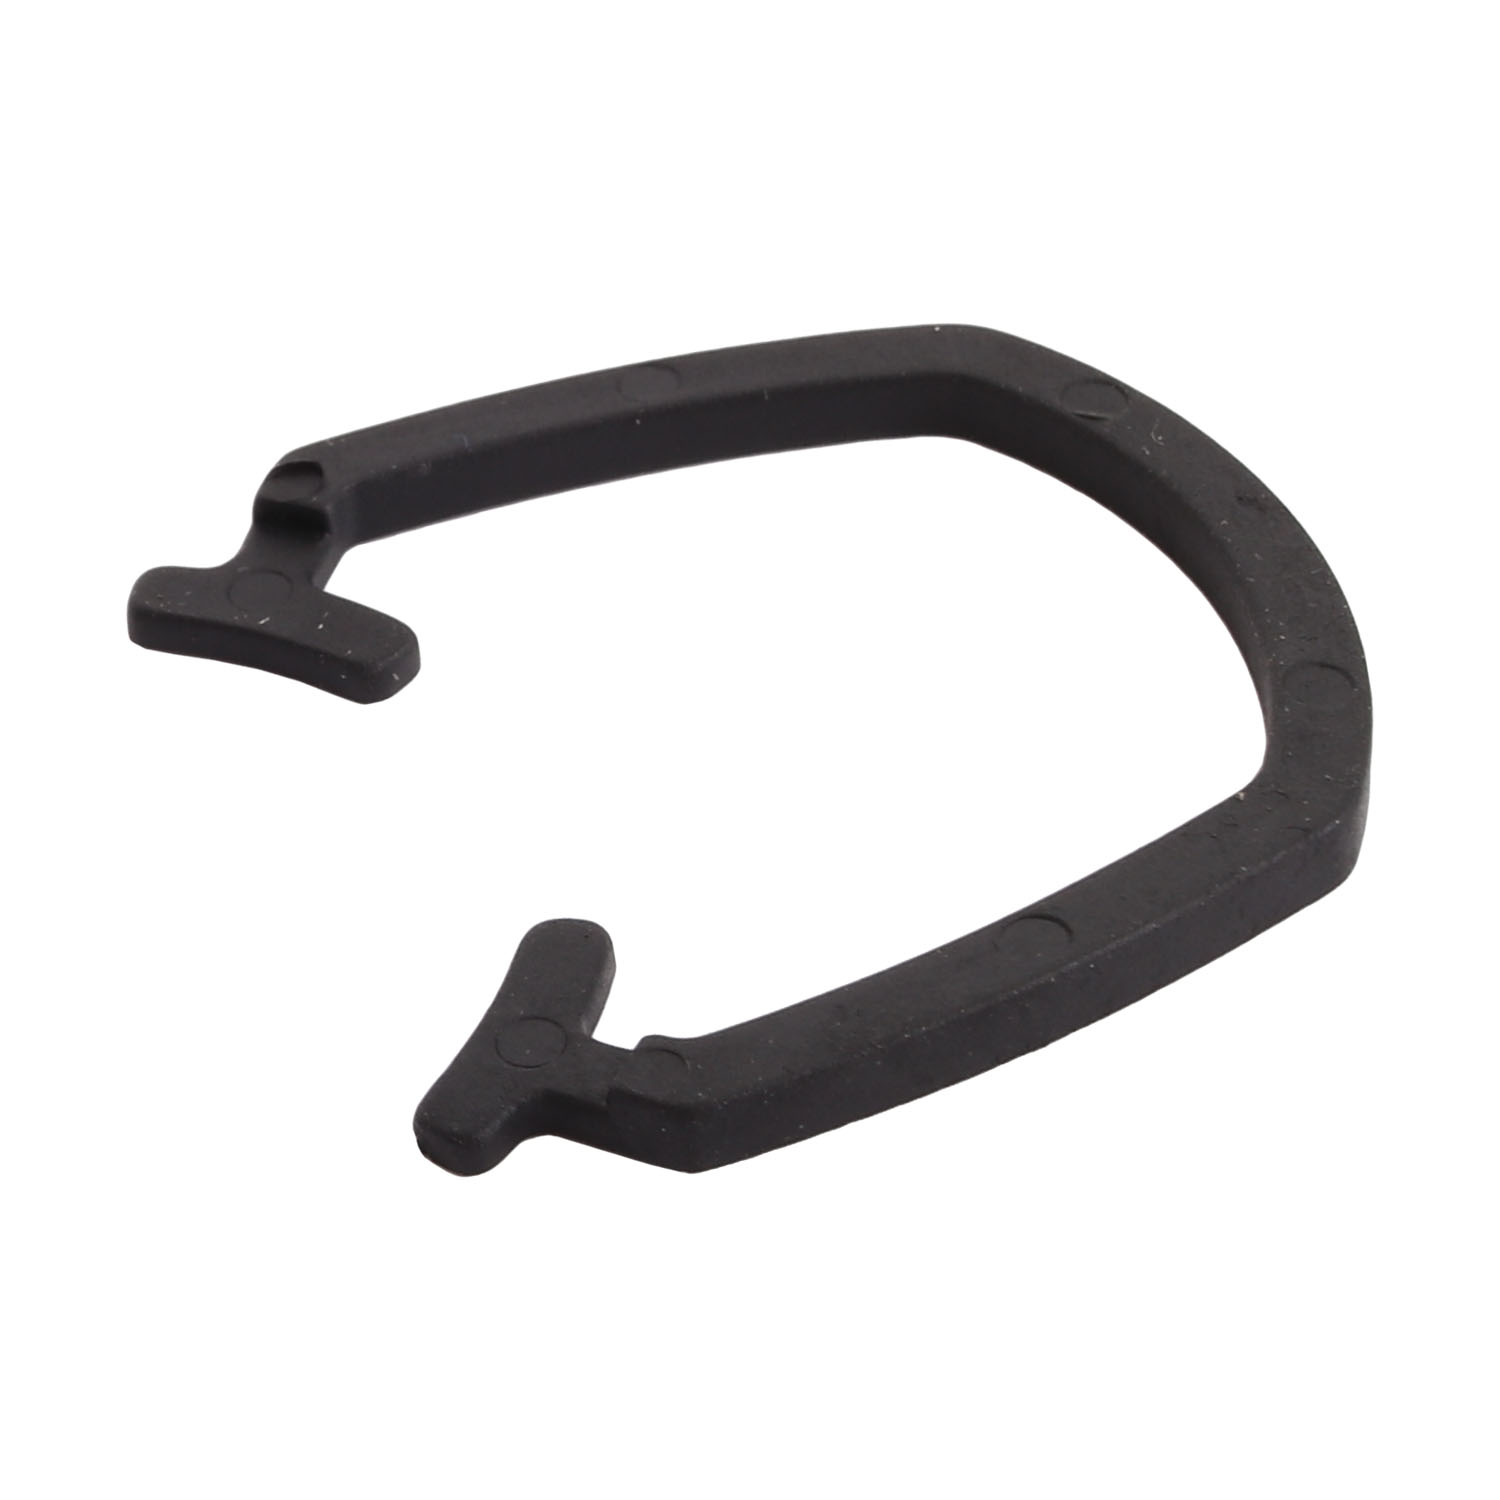 Picture of Giant Aero Headset Spacer | 31.8 x 37.9 mm - 1319-318OD2-0004 | Rubber / 2.5 mm